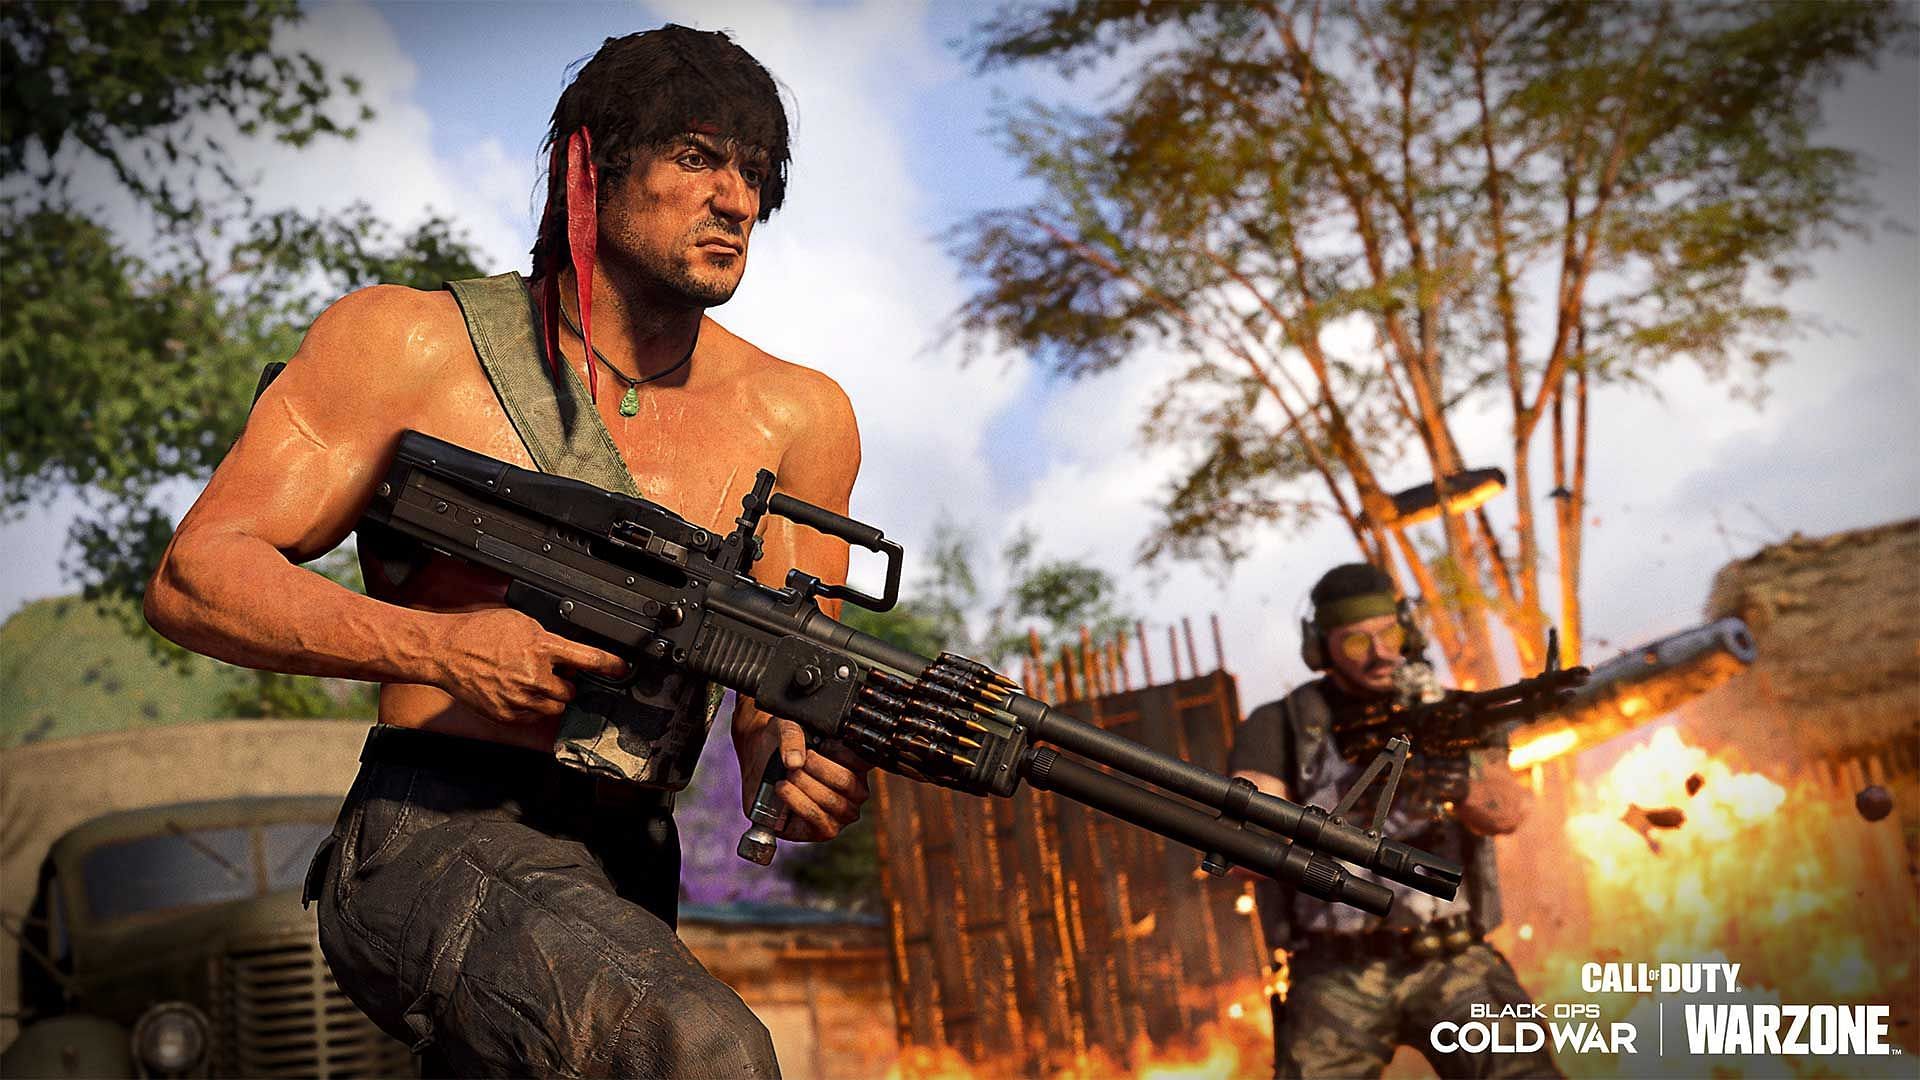 Rambo in Call Of Duty Black Ops: Cold War (Image via Activision)